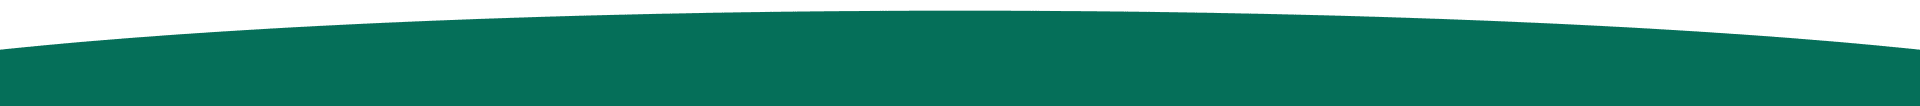 A green background with a white border.